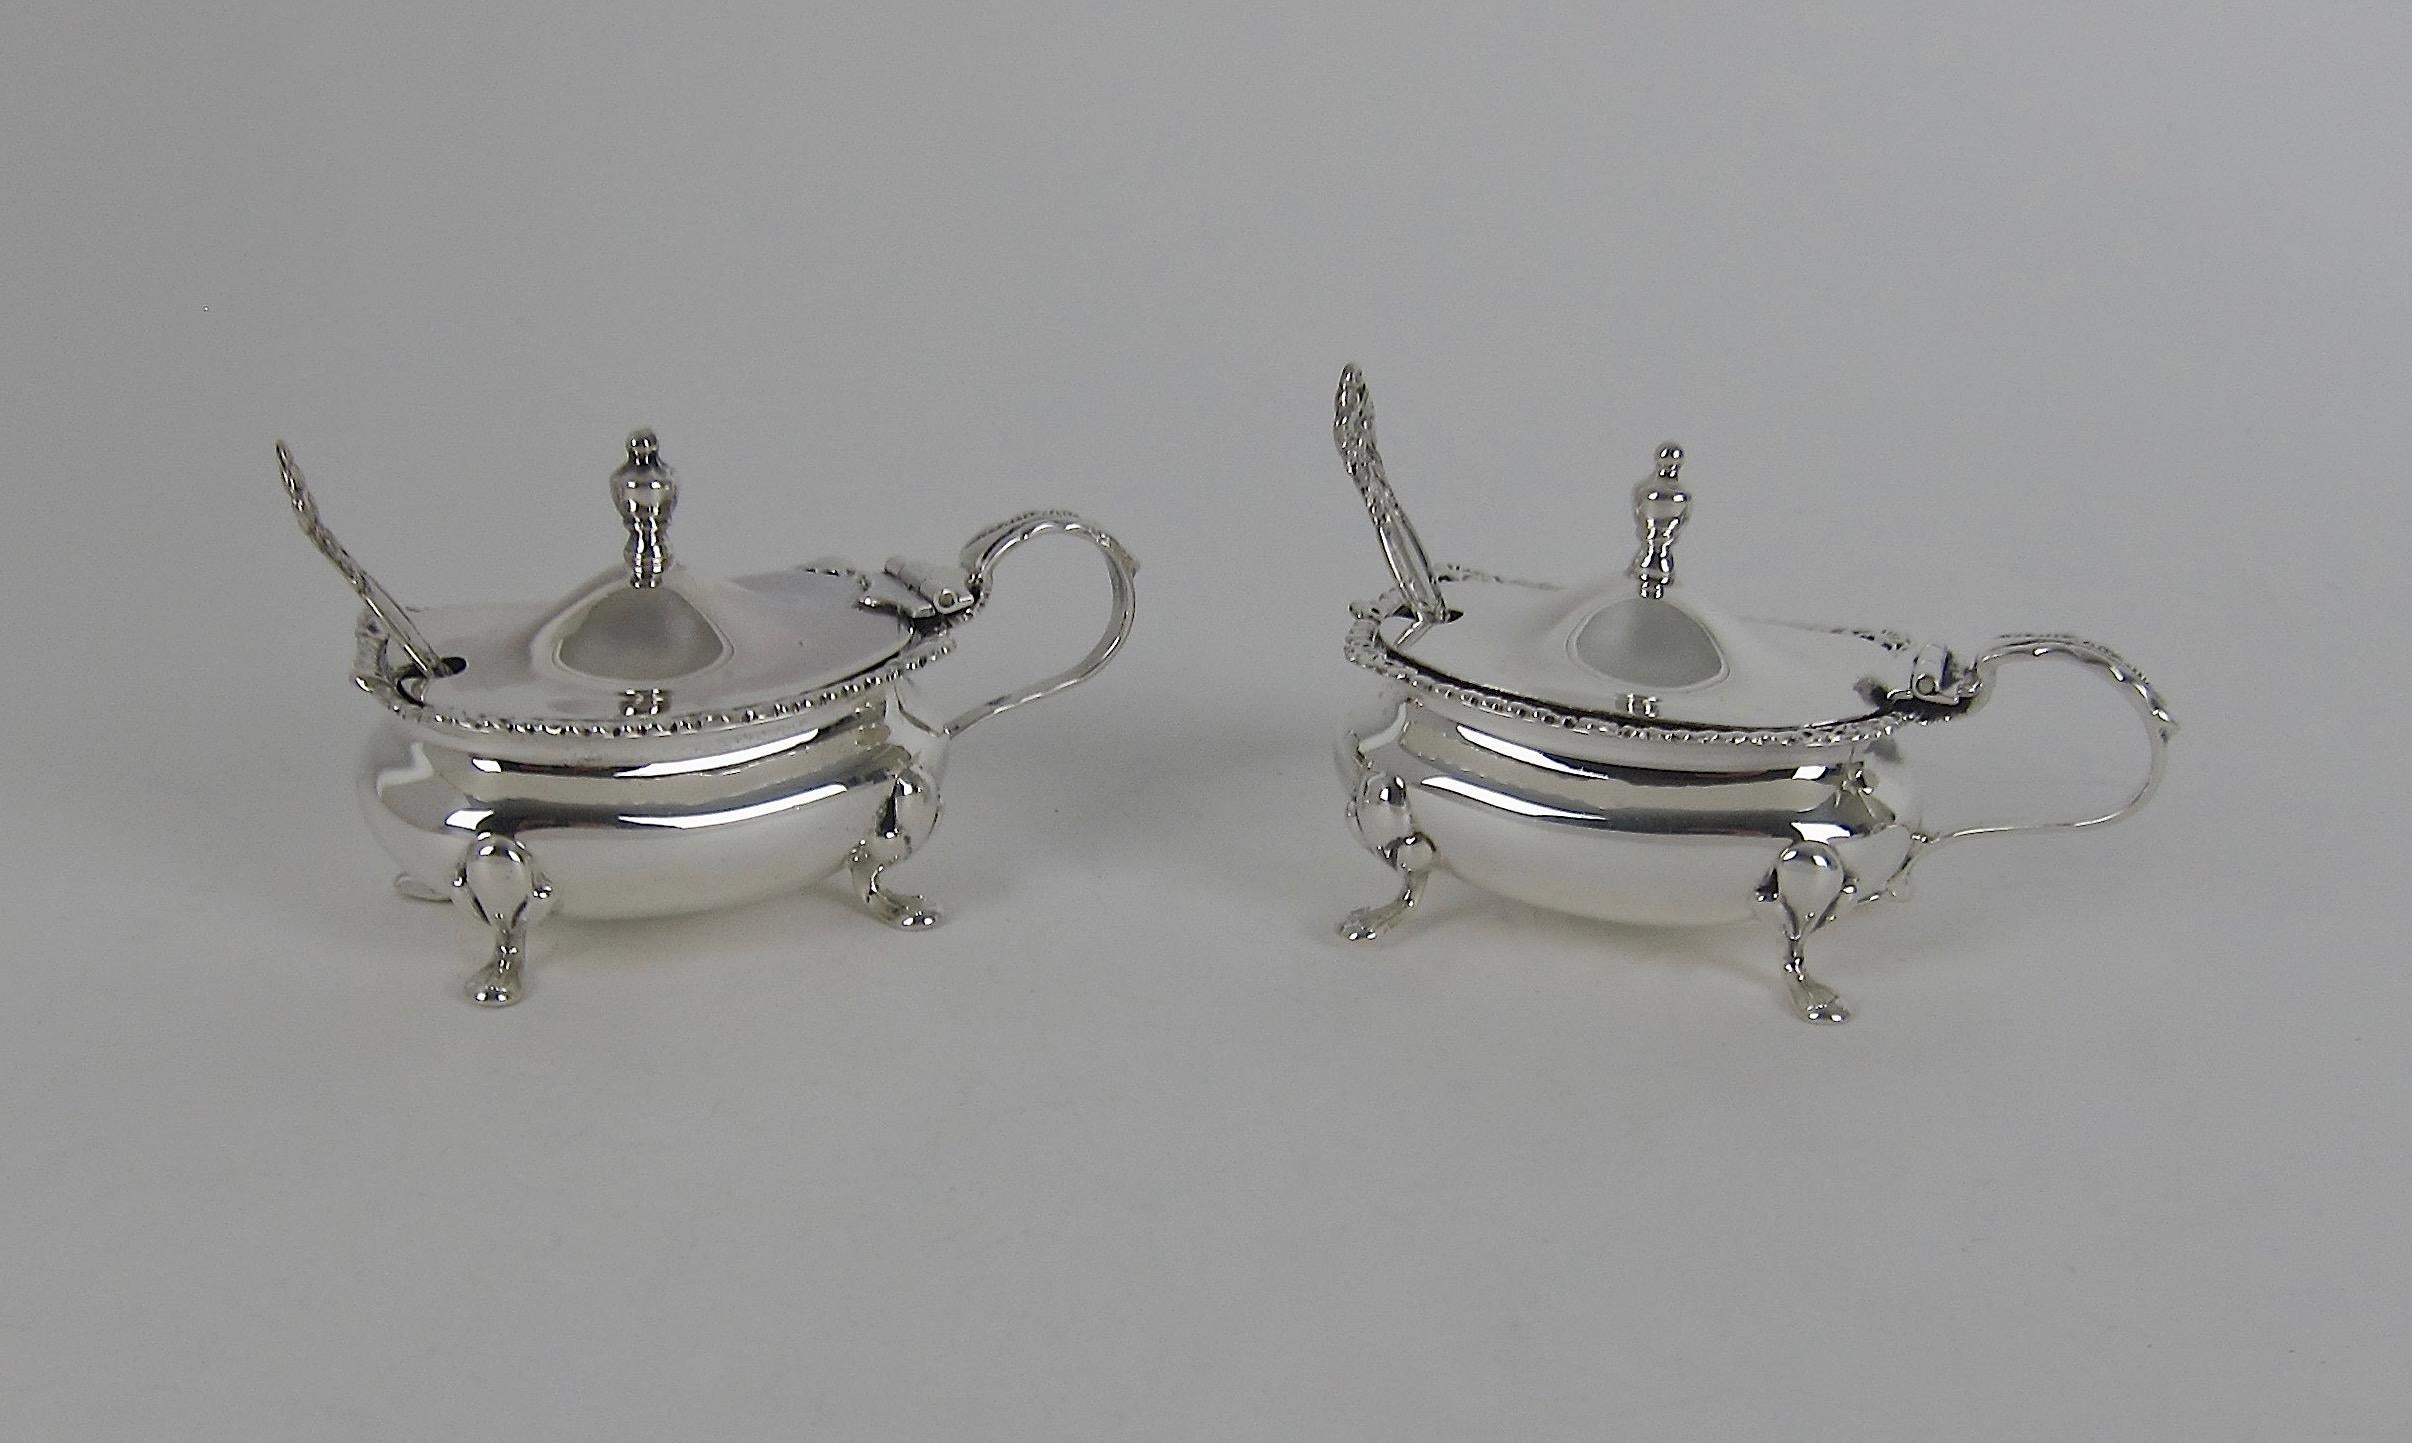 Antique Sterling Silver Mustard Pots from the Goldsmiths & Silversmiths Co Ltd 6